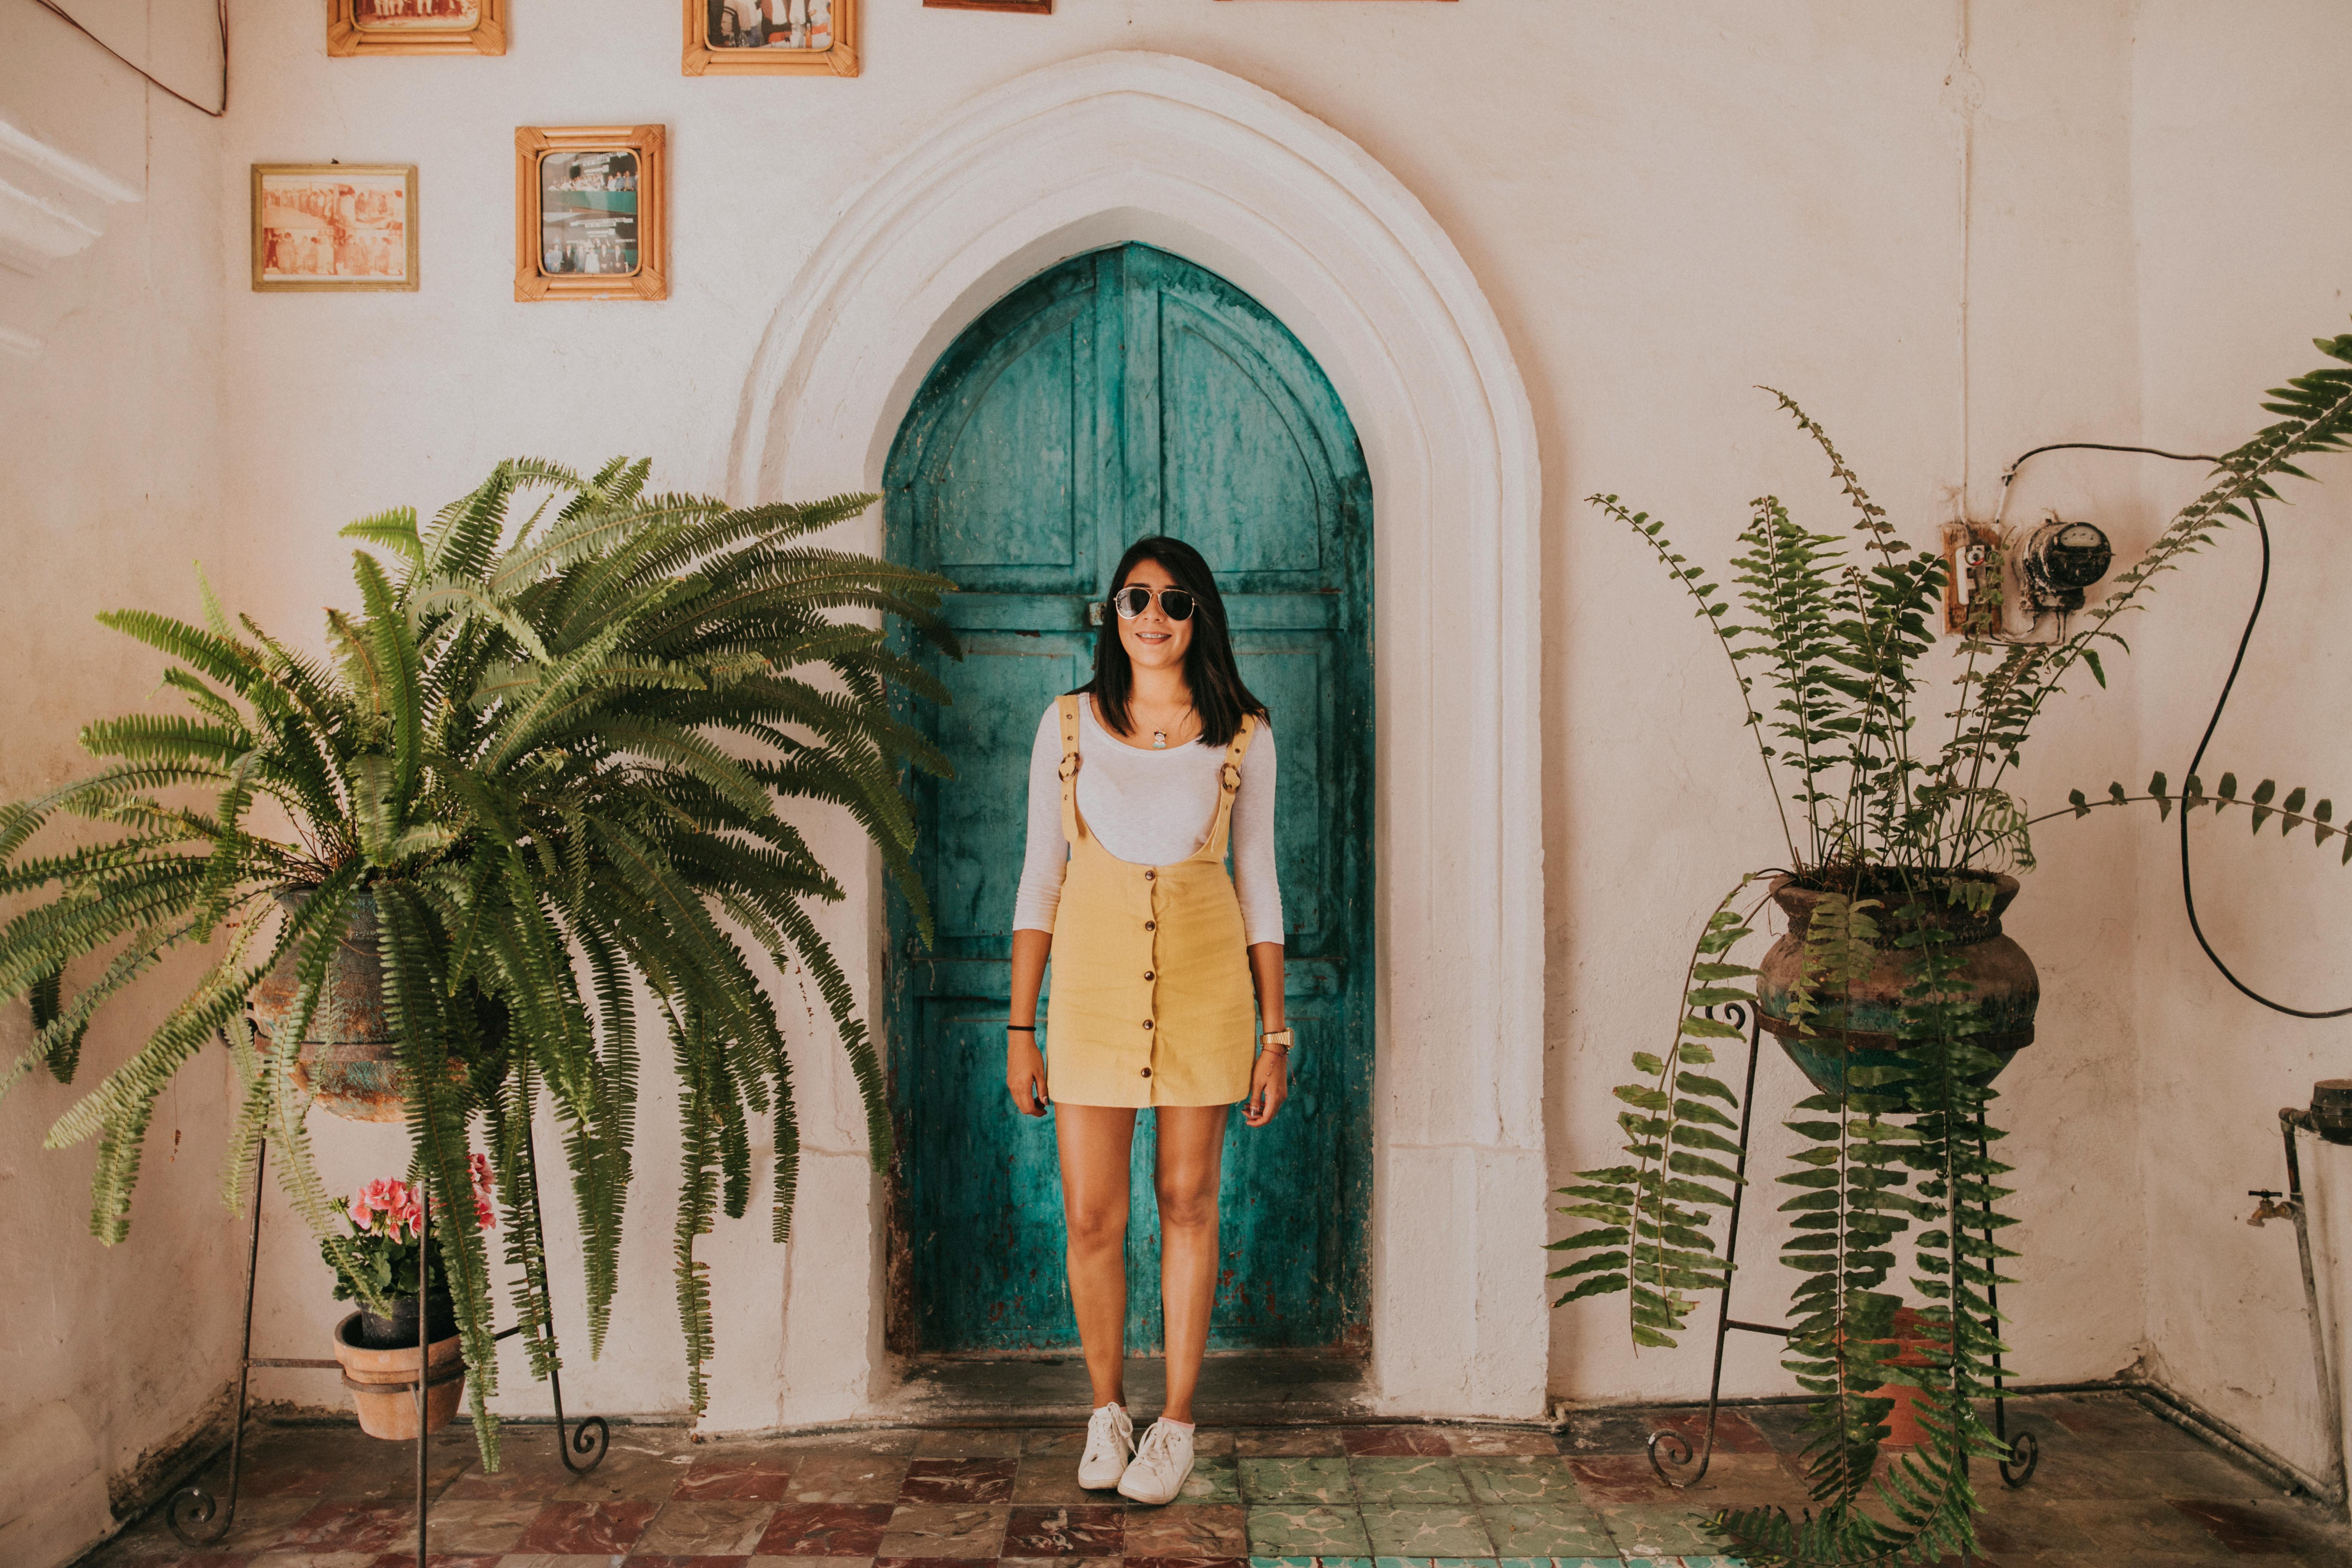 A woman standing in the doorway of a house | Source: Pexels